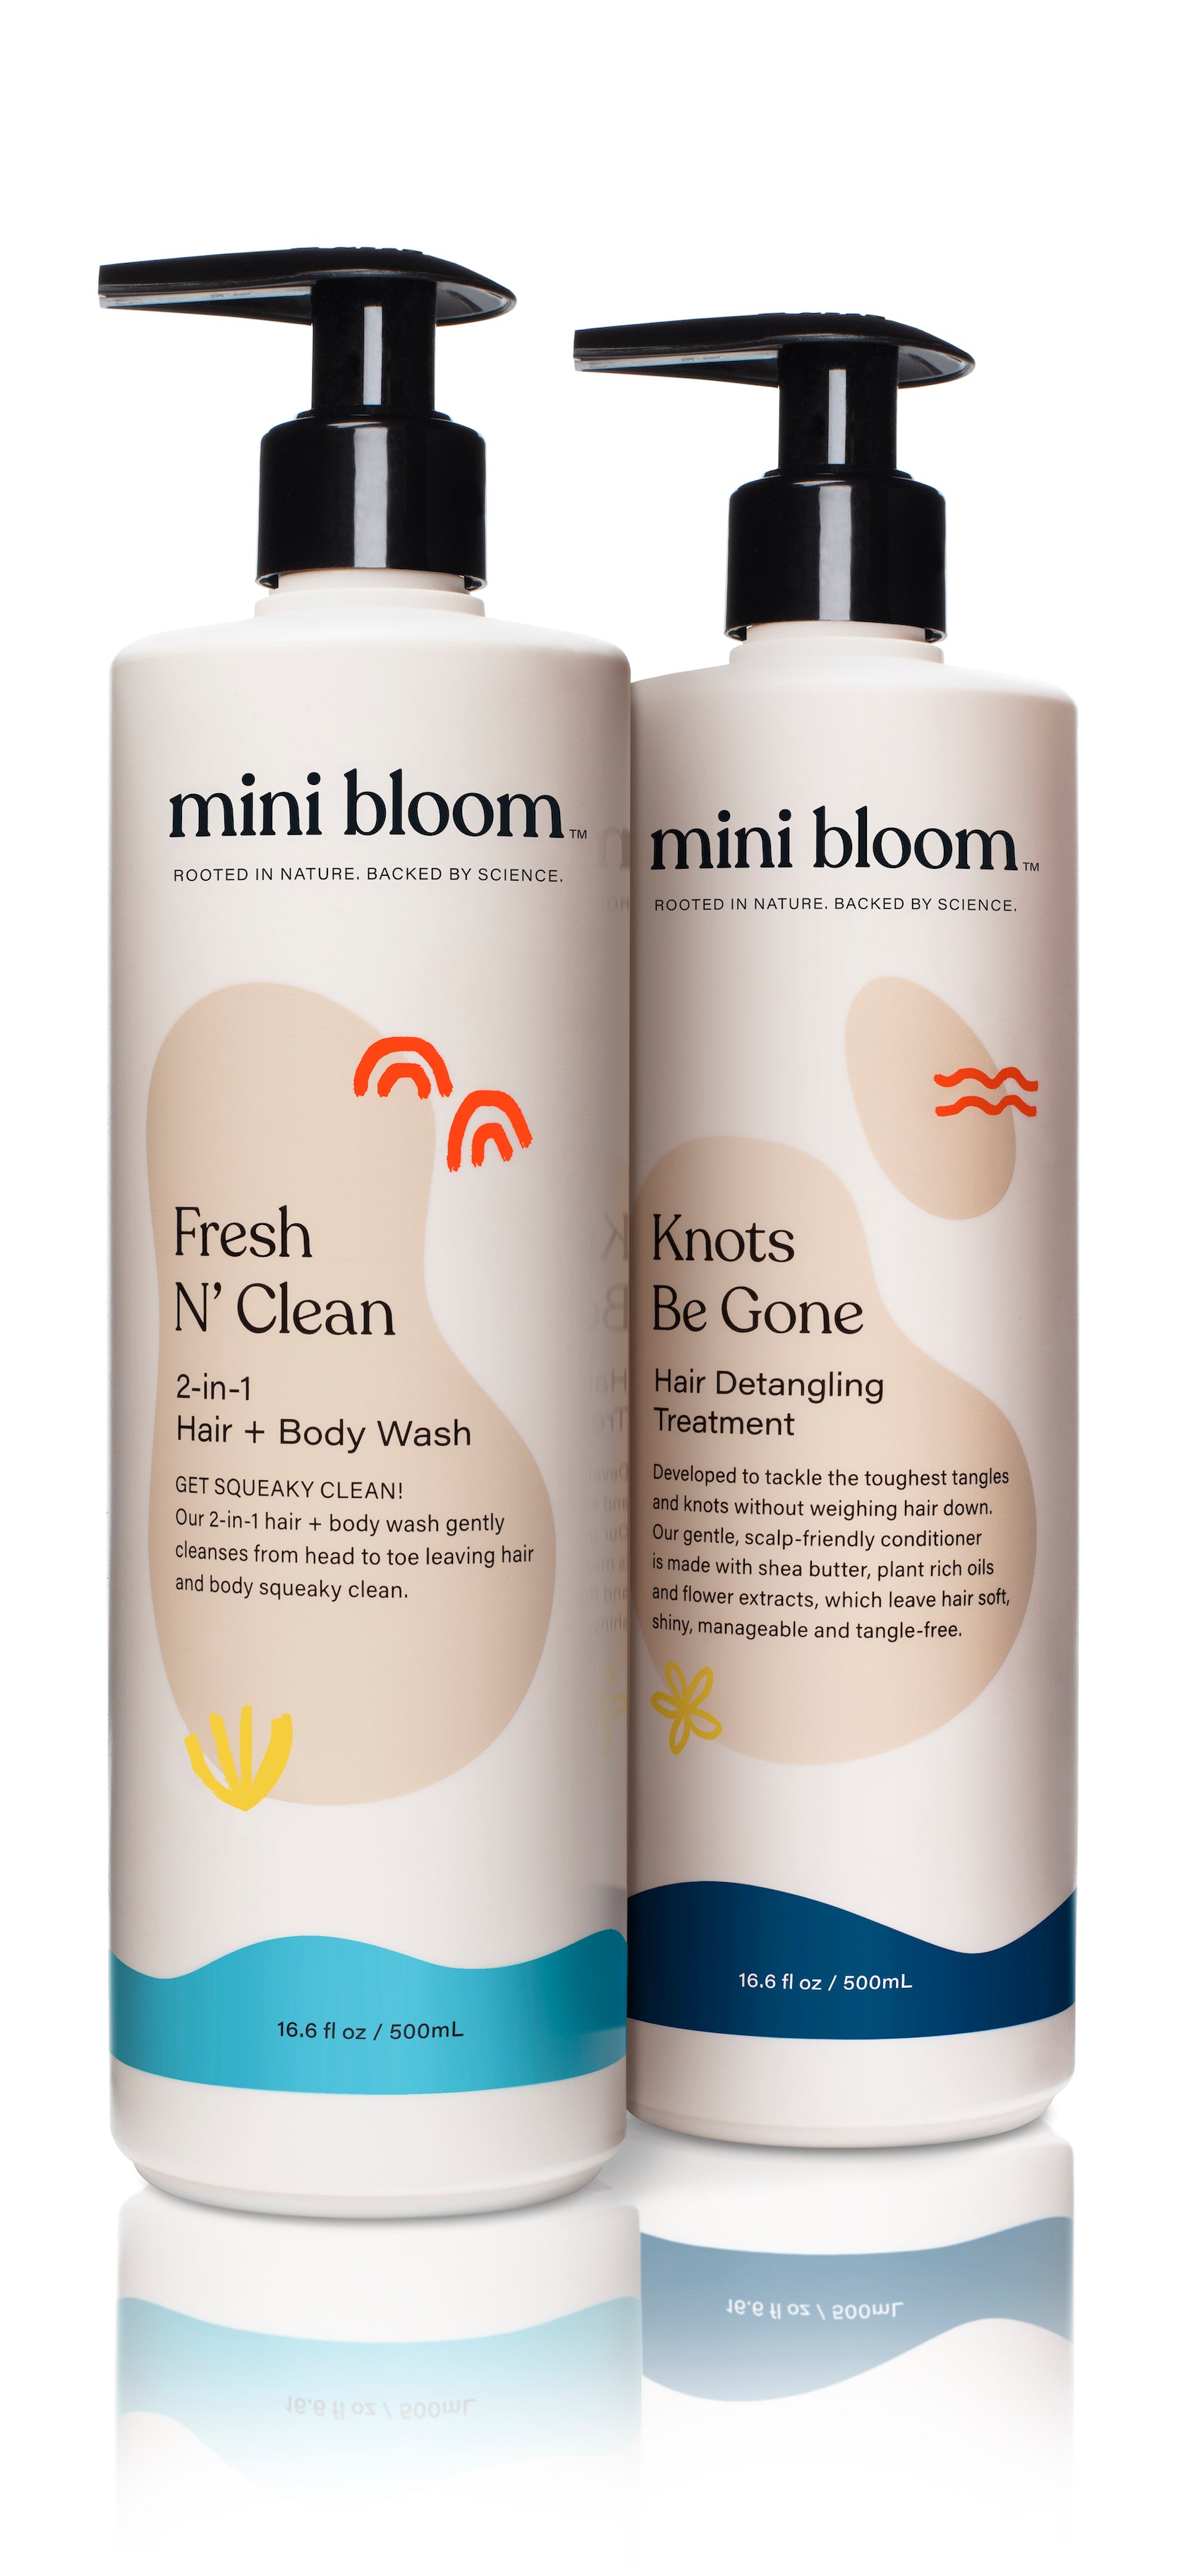 Clean Body Care, Bath Products & Hair Care